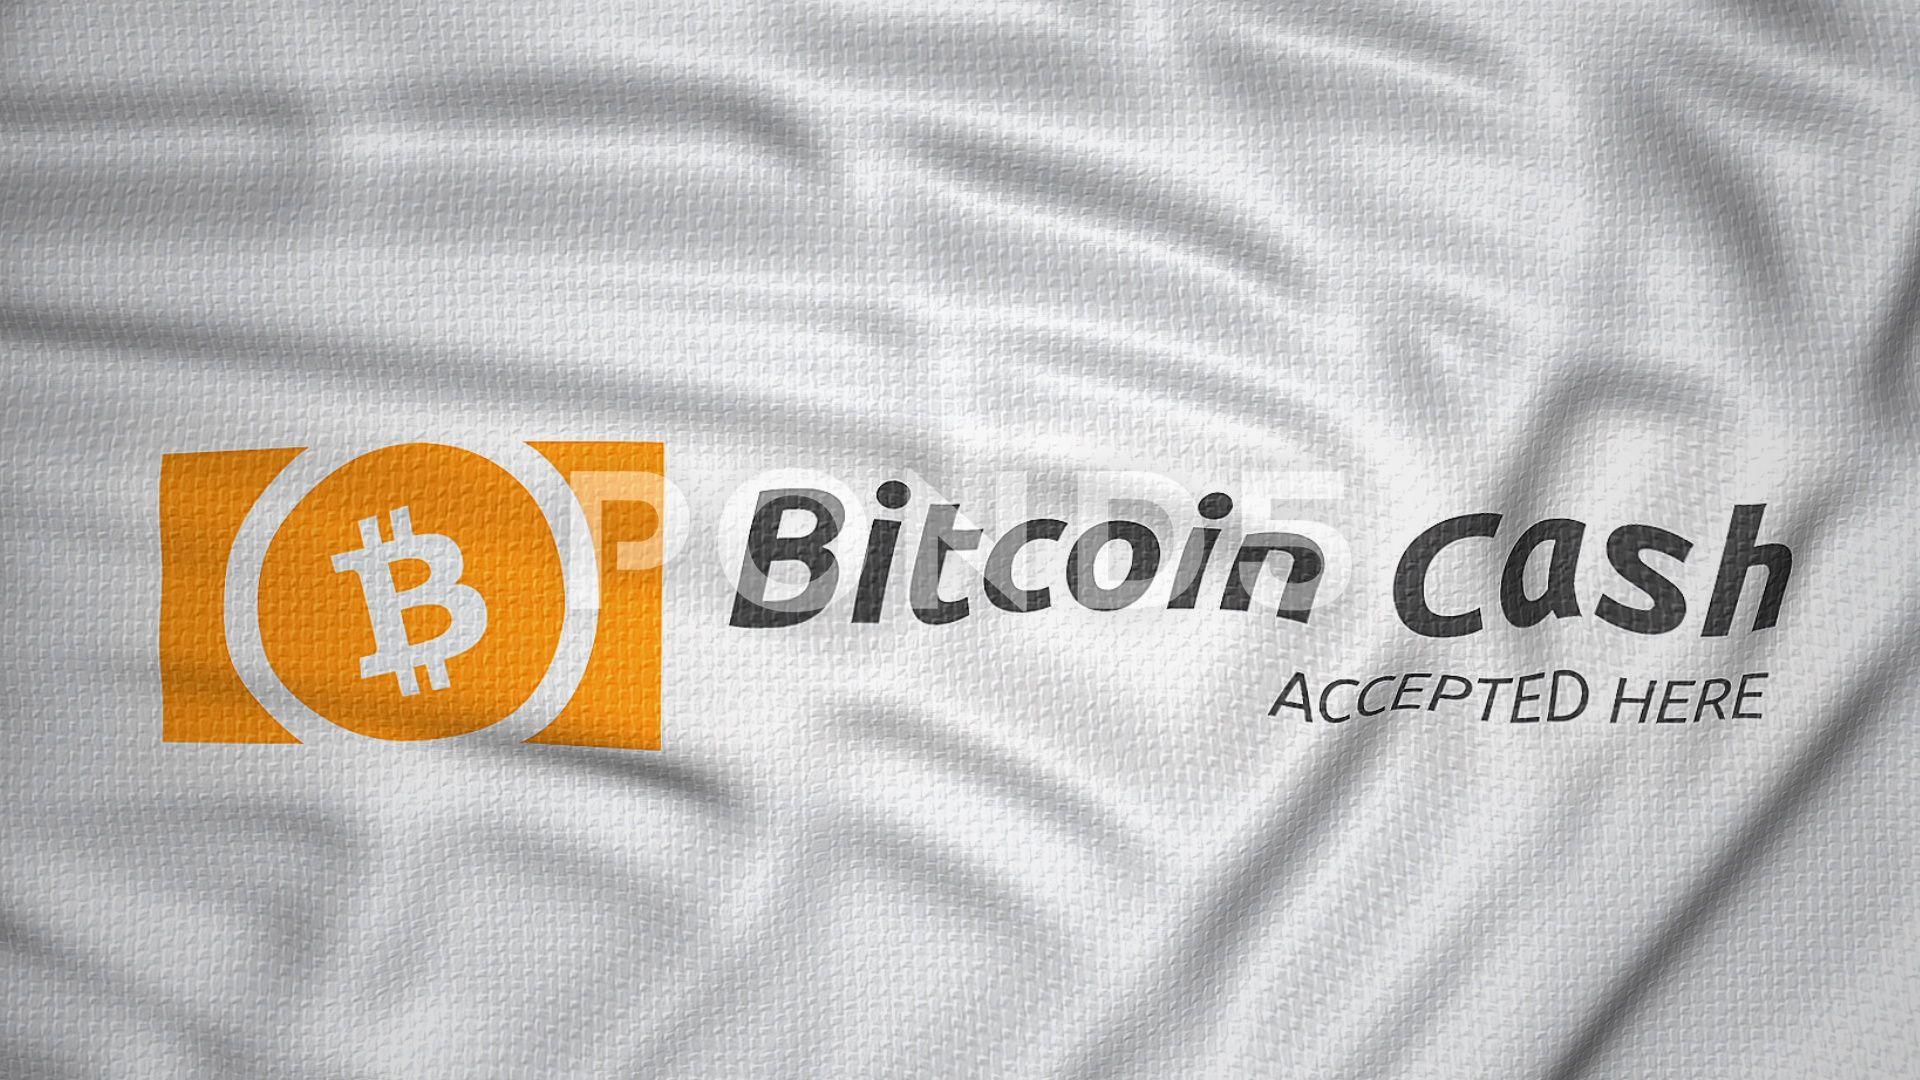 Cash Accepted Logo - Bitcoin cash accepted here, banner logo flag waving ~ Footage #83460903